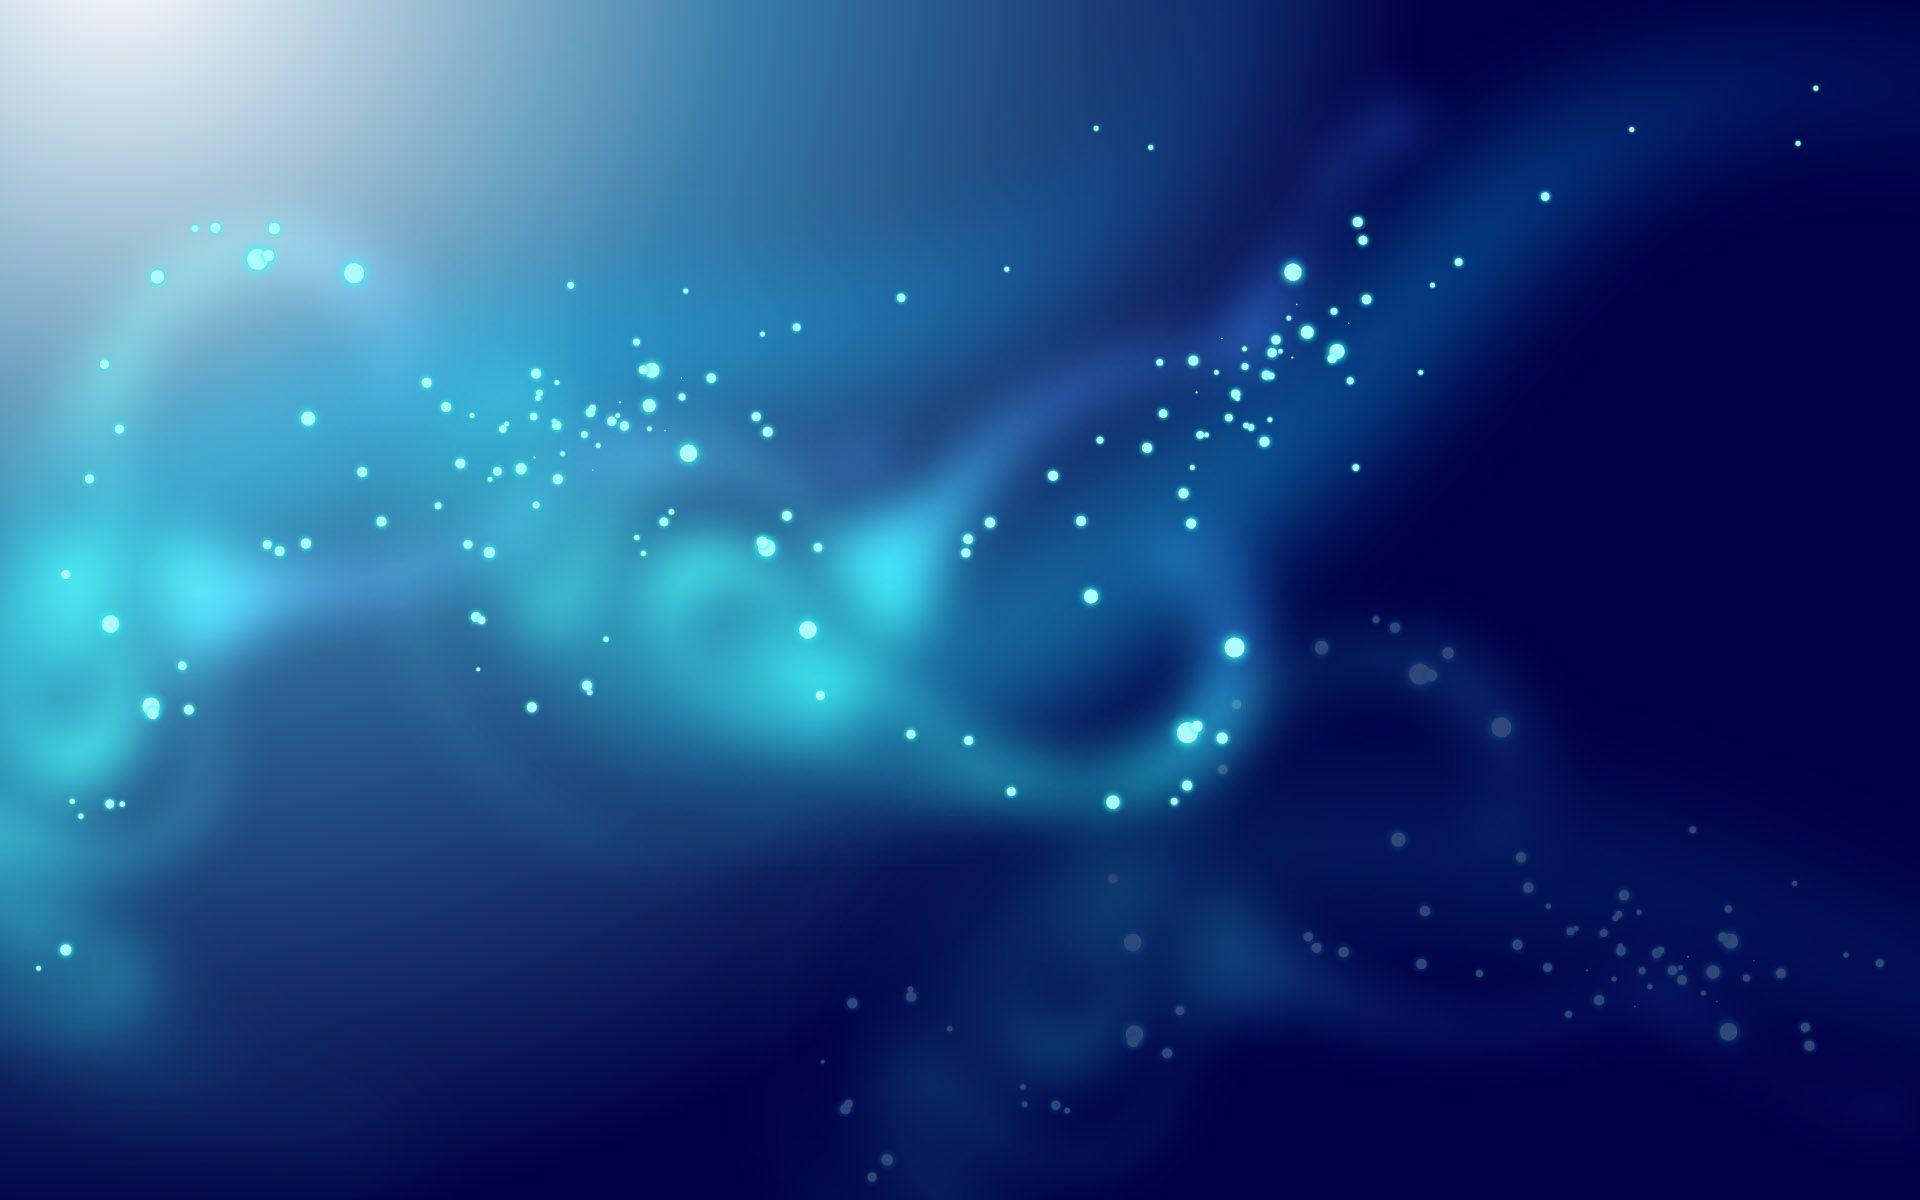 Wallpaper For > Blue And White Sparkle Background